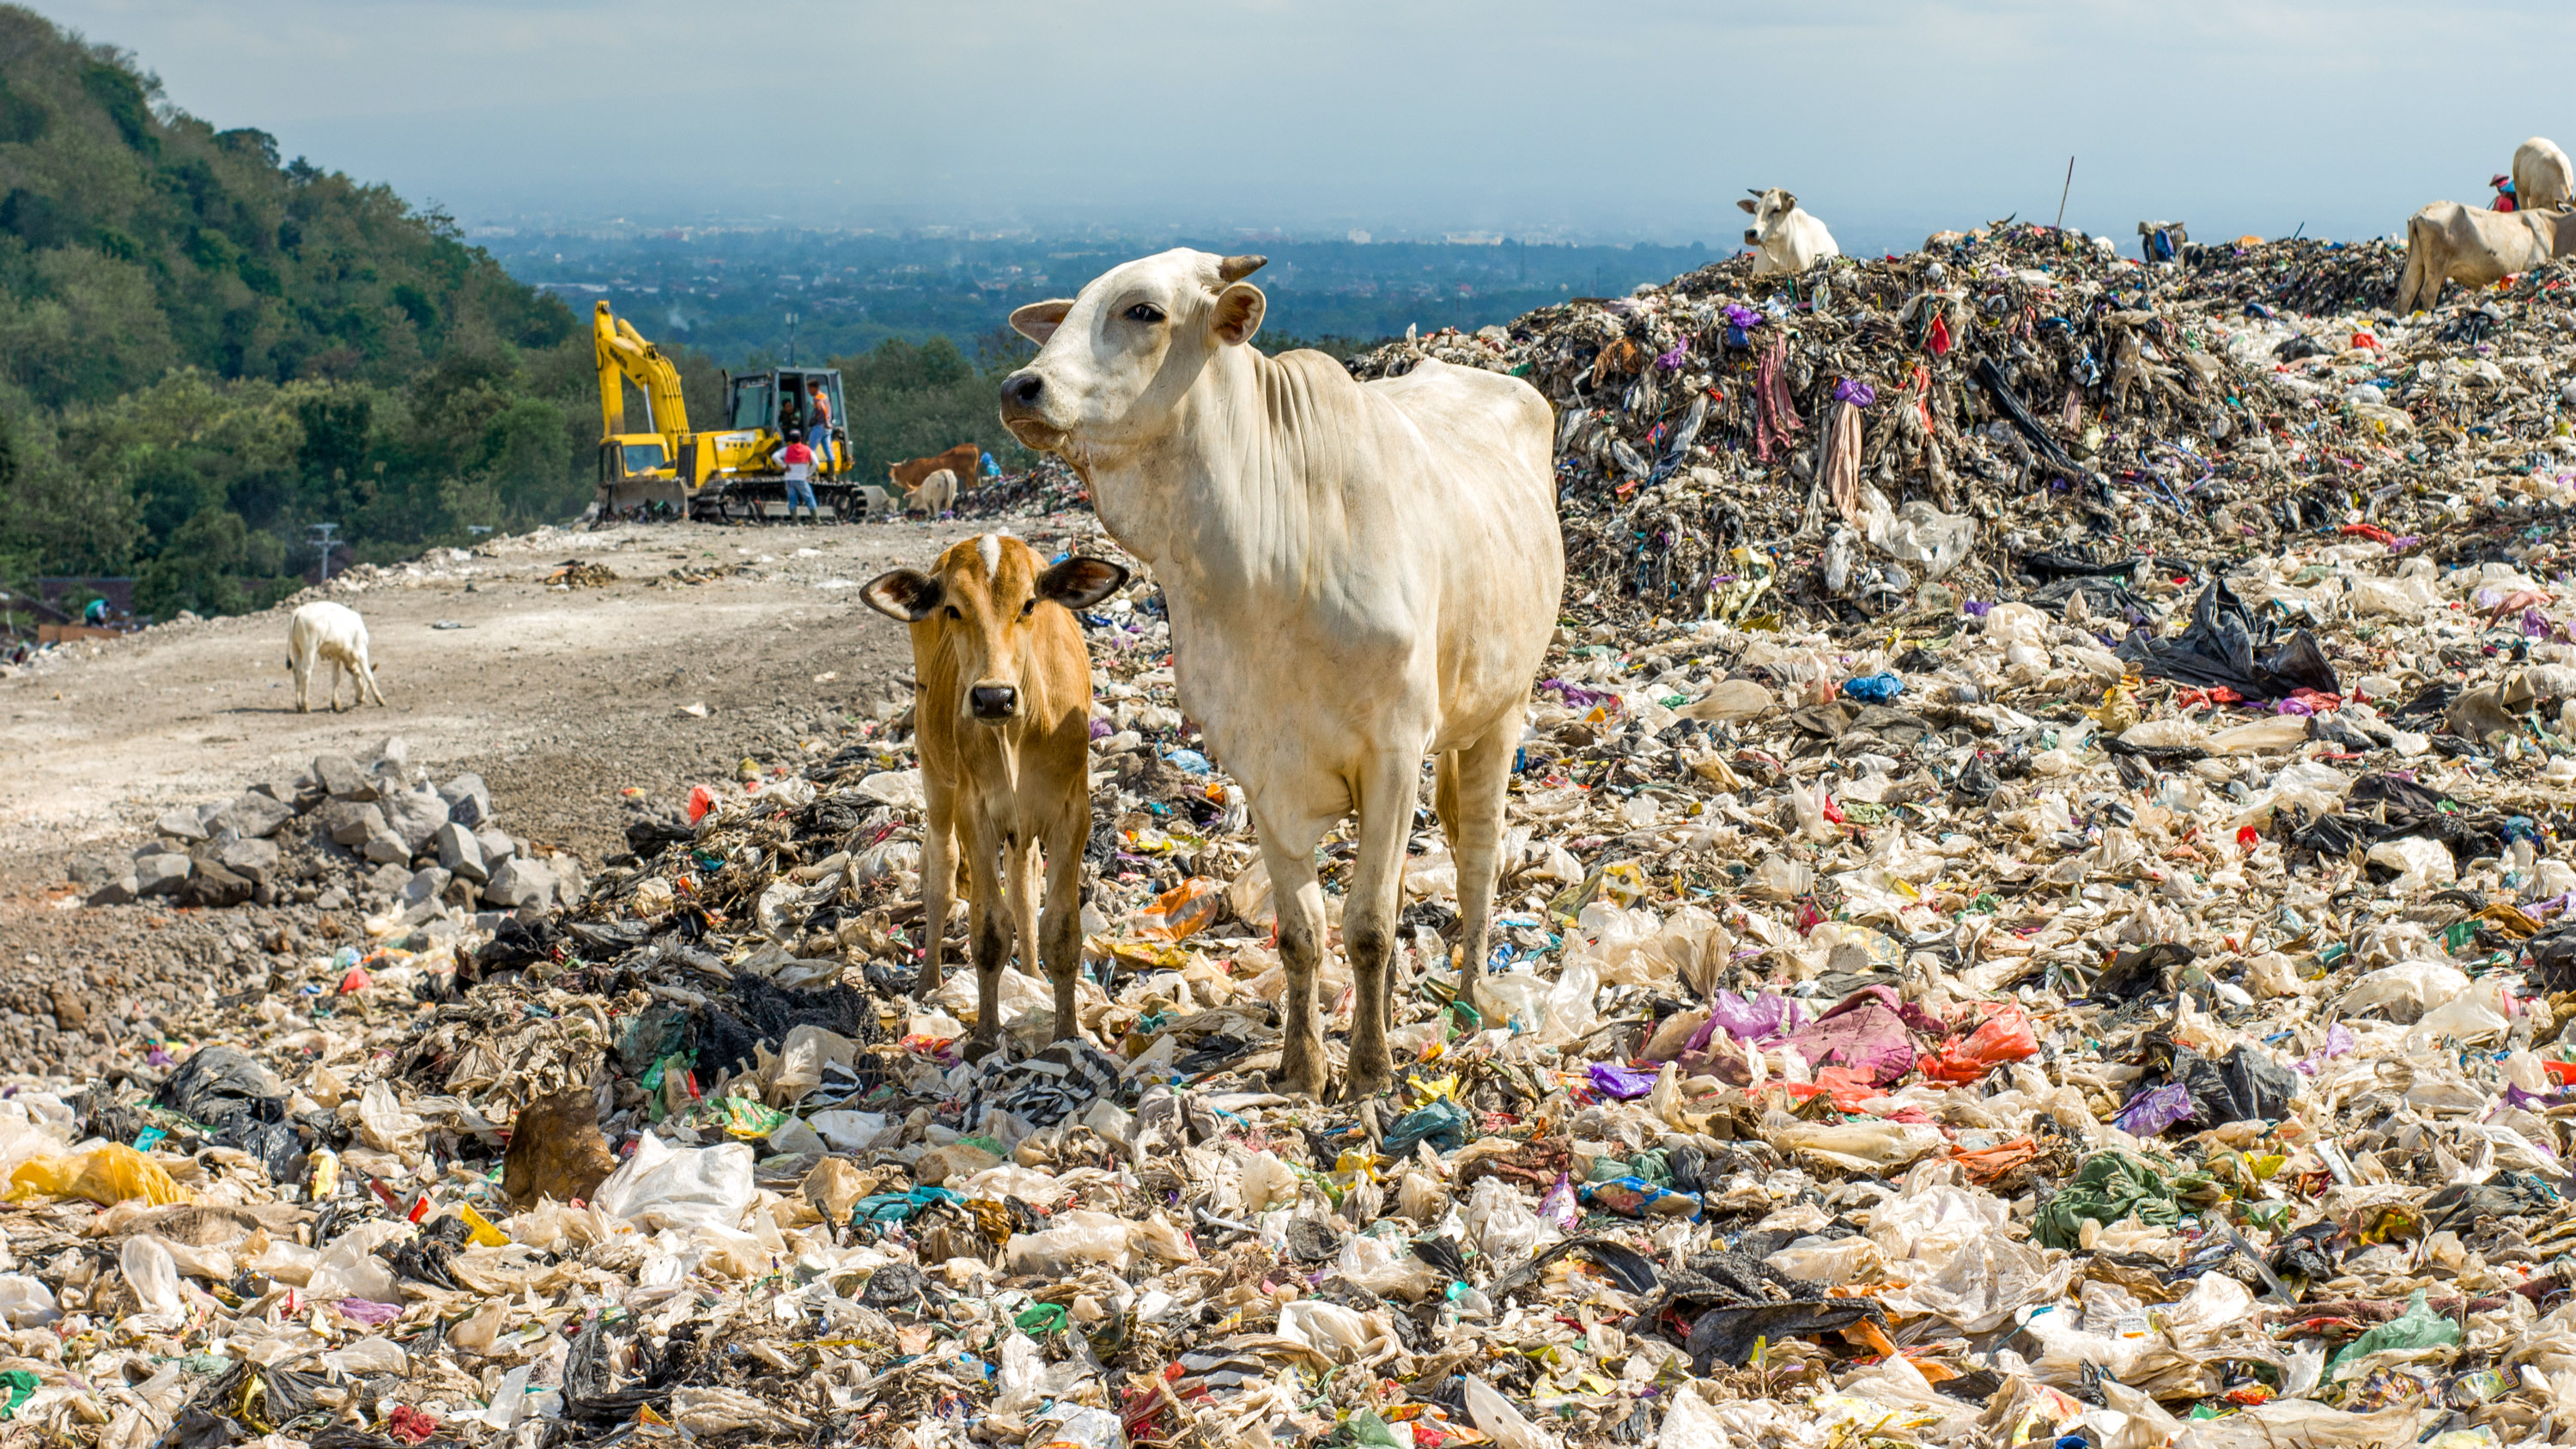 Cows sit and stand in plastic bags and other refuse in the municipal garbage shelter at piyungan landfill, Yogyakarta Indonesia